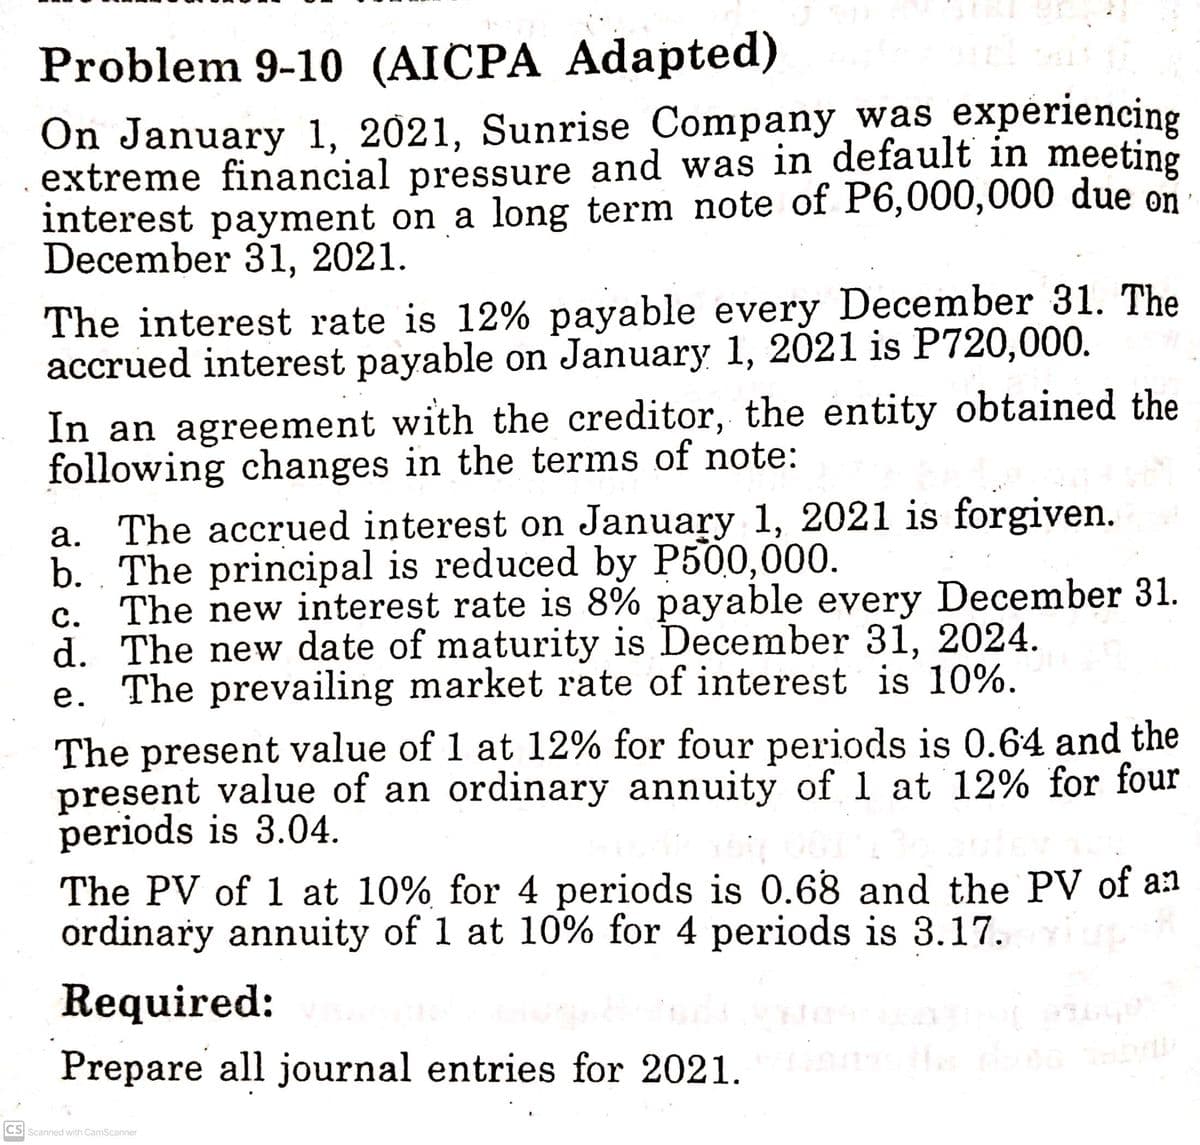 Problem 9-10 (AICPA Adapted)
On January 1, 2021, Sunrise Company was experiencing
extreme financial pressure and was in default in meeting
interest payment on a long term note of P6,000,000 due on
December 31, 2021.
The interest rate is 12% payable every December 31. The
accrued interest payable on January 1, 2021 is P720,000.
In an agreement with the creditor, the entity obtained the
following changes in the terms of note:
a. The accrued interest on January 1, 2021 is forgiven.
b. The principal is reduced by P500,000.
c.
d.
The new interest rate is 8% payable every December 31.
The new date of maturity is December 31, 2024.
The prevailing market rate of interest is 10%.
e.
The present value of 1 at 12% for four periods is 0.64 and the
present value of an ordinary annuity of 1 at 12% for four
periods is 3.04.
The PV of 1 at 10% for 4 periods is 0.68 and the PV of an
ordinary annuity of 1 at 10% for 4 periods is 3.17.
Required:
Prepare all journal entries for 2021.
CS Scanned with CamScanner
luba